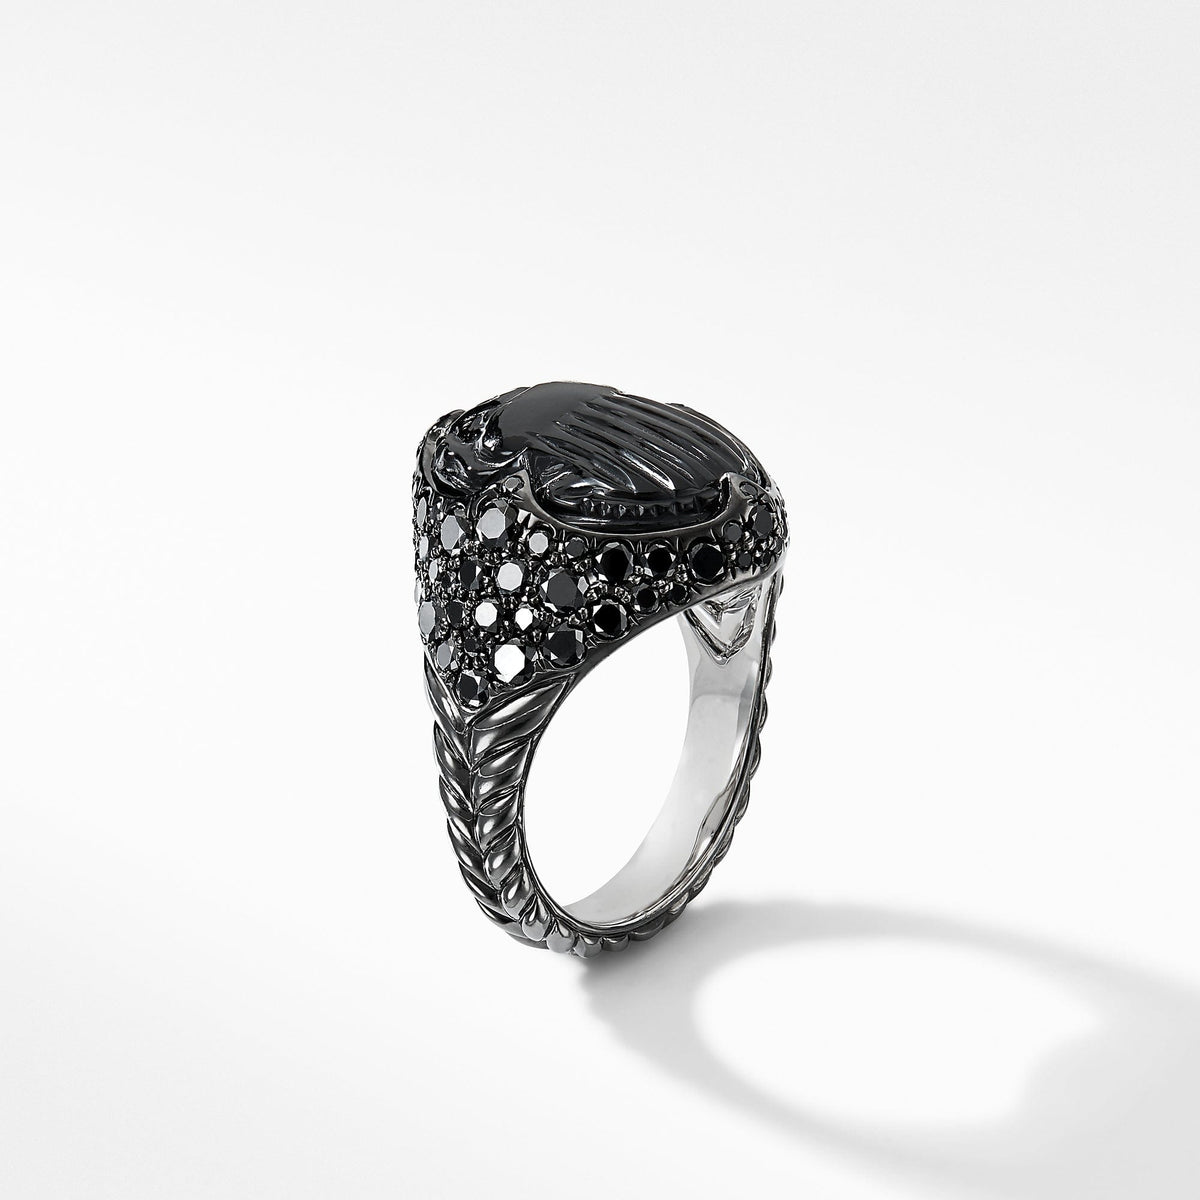 Petrvs Pinky Ring in 18K White Gold with Black Rhodium, Black Onyx and Pavé Black Diamonds, Long's Jewelers